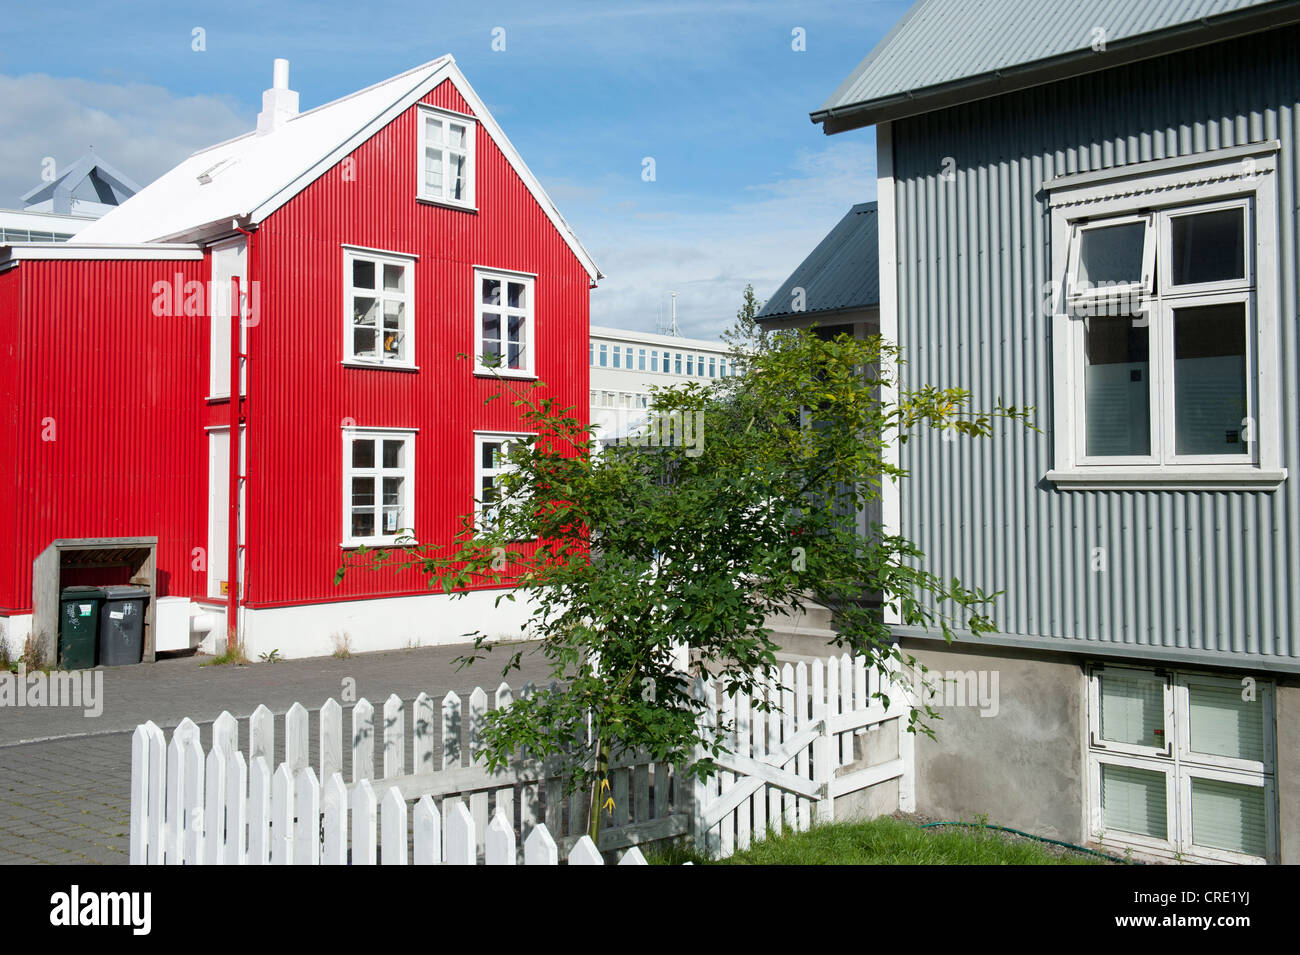 Red and grey house made of corrugated iron, private homes, Reykjavík, Ísland, Iceland, Scandinavia, Northern Europe, Europe Stock Photo